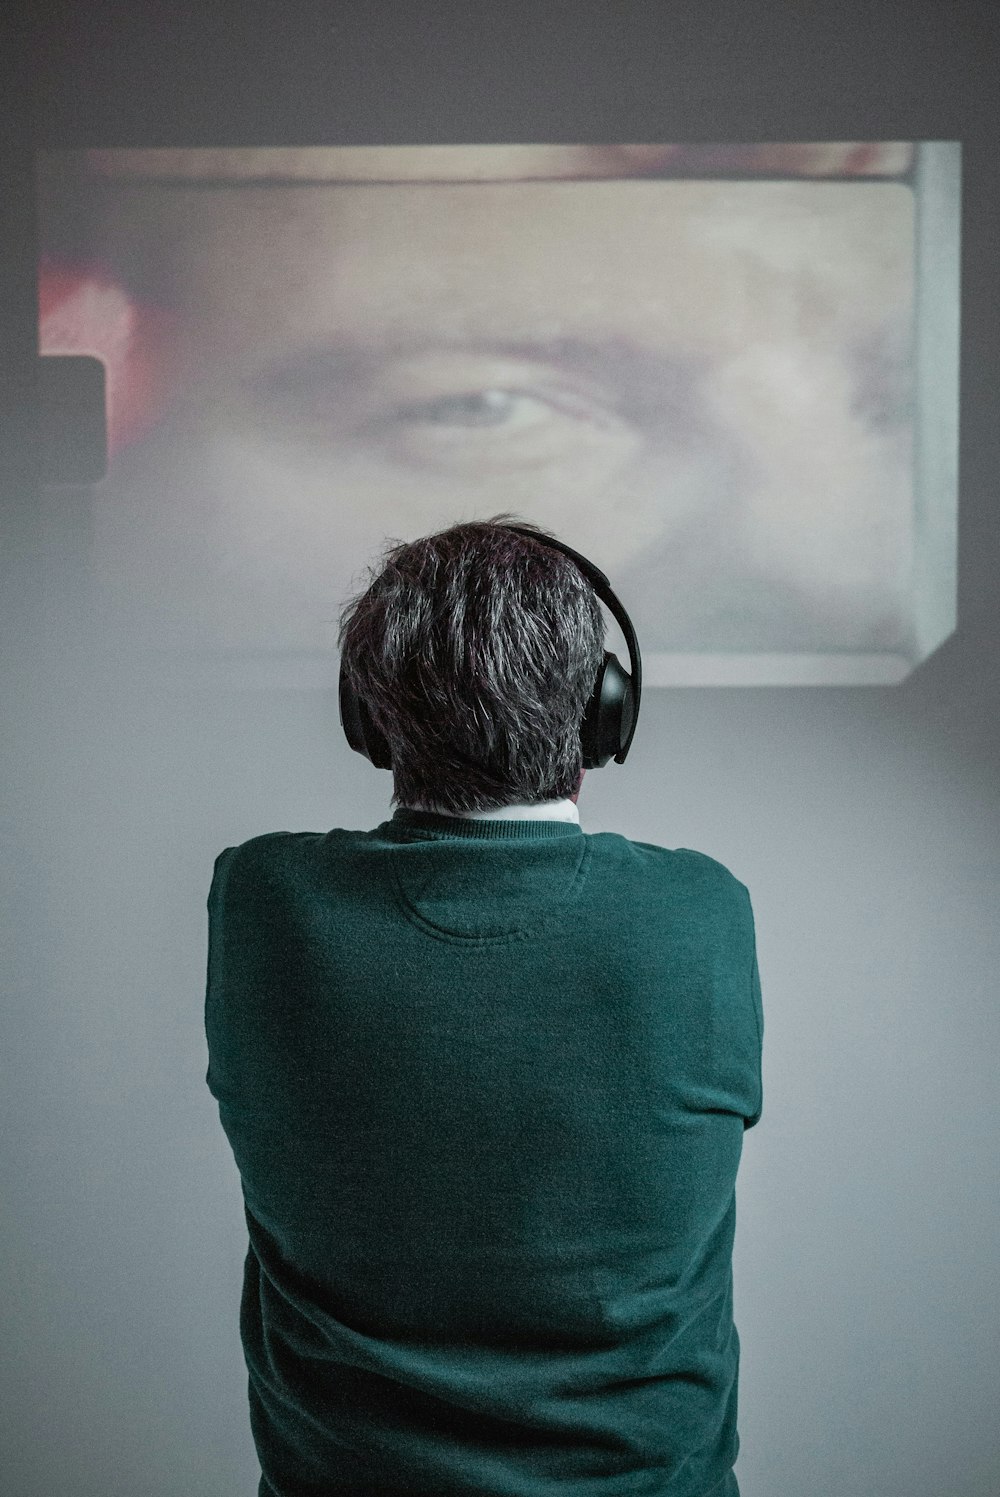 person wearing green shirt using black headphones while standing and facing back and watching movie